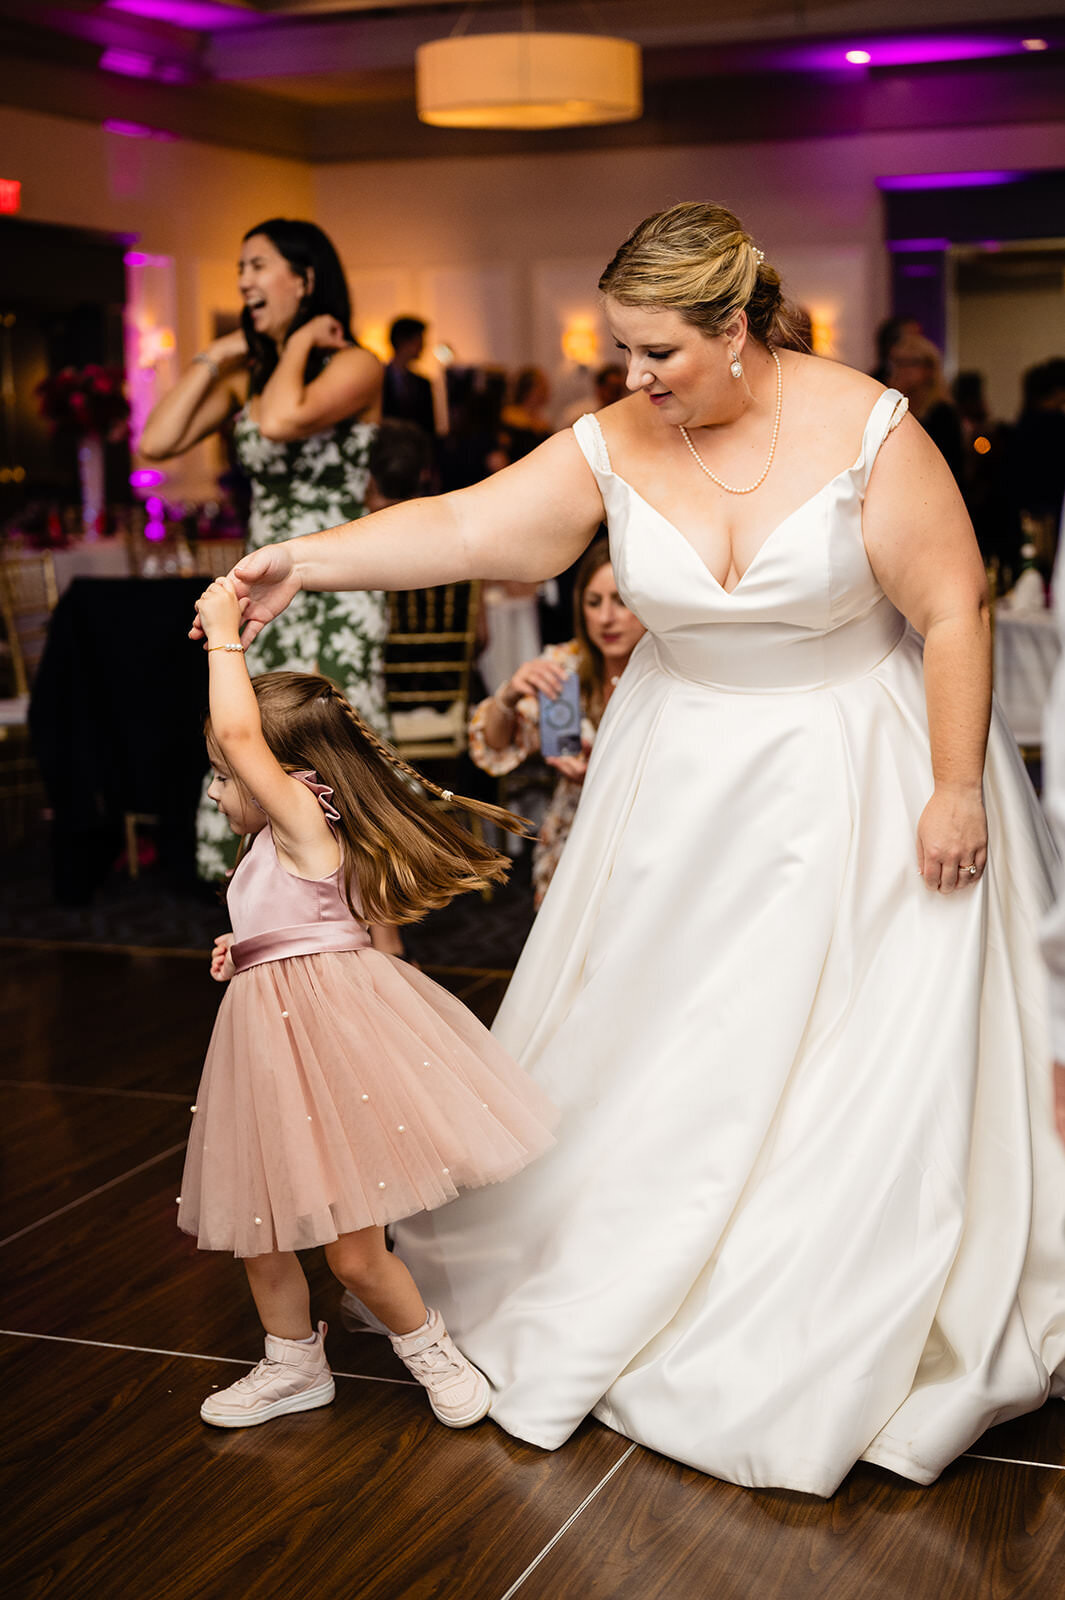 A bride joyfully dances with a young girl in a pink dress, swinging her around the dance floor.